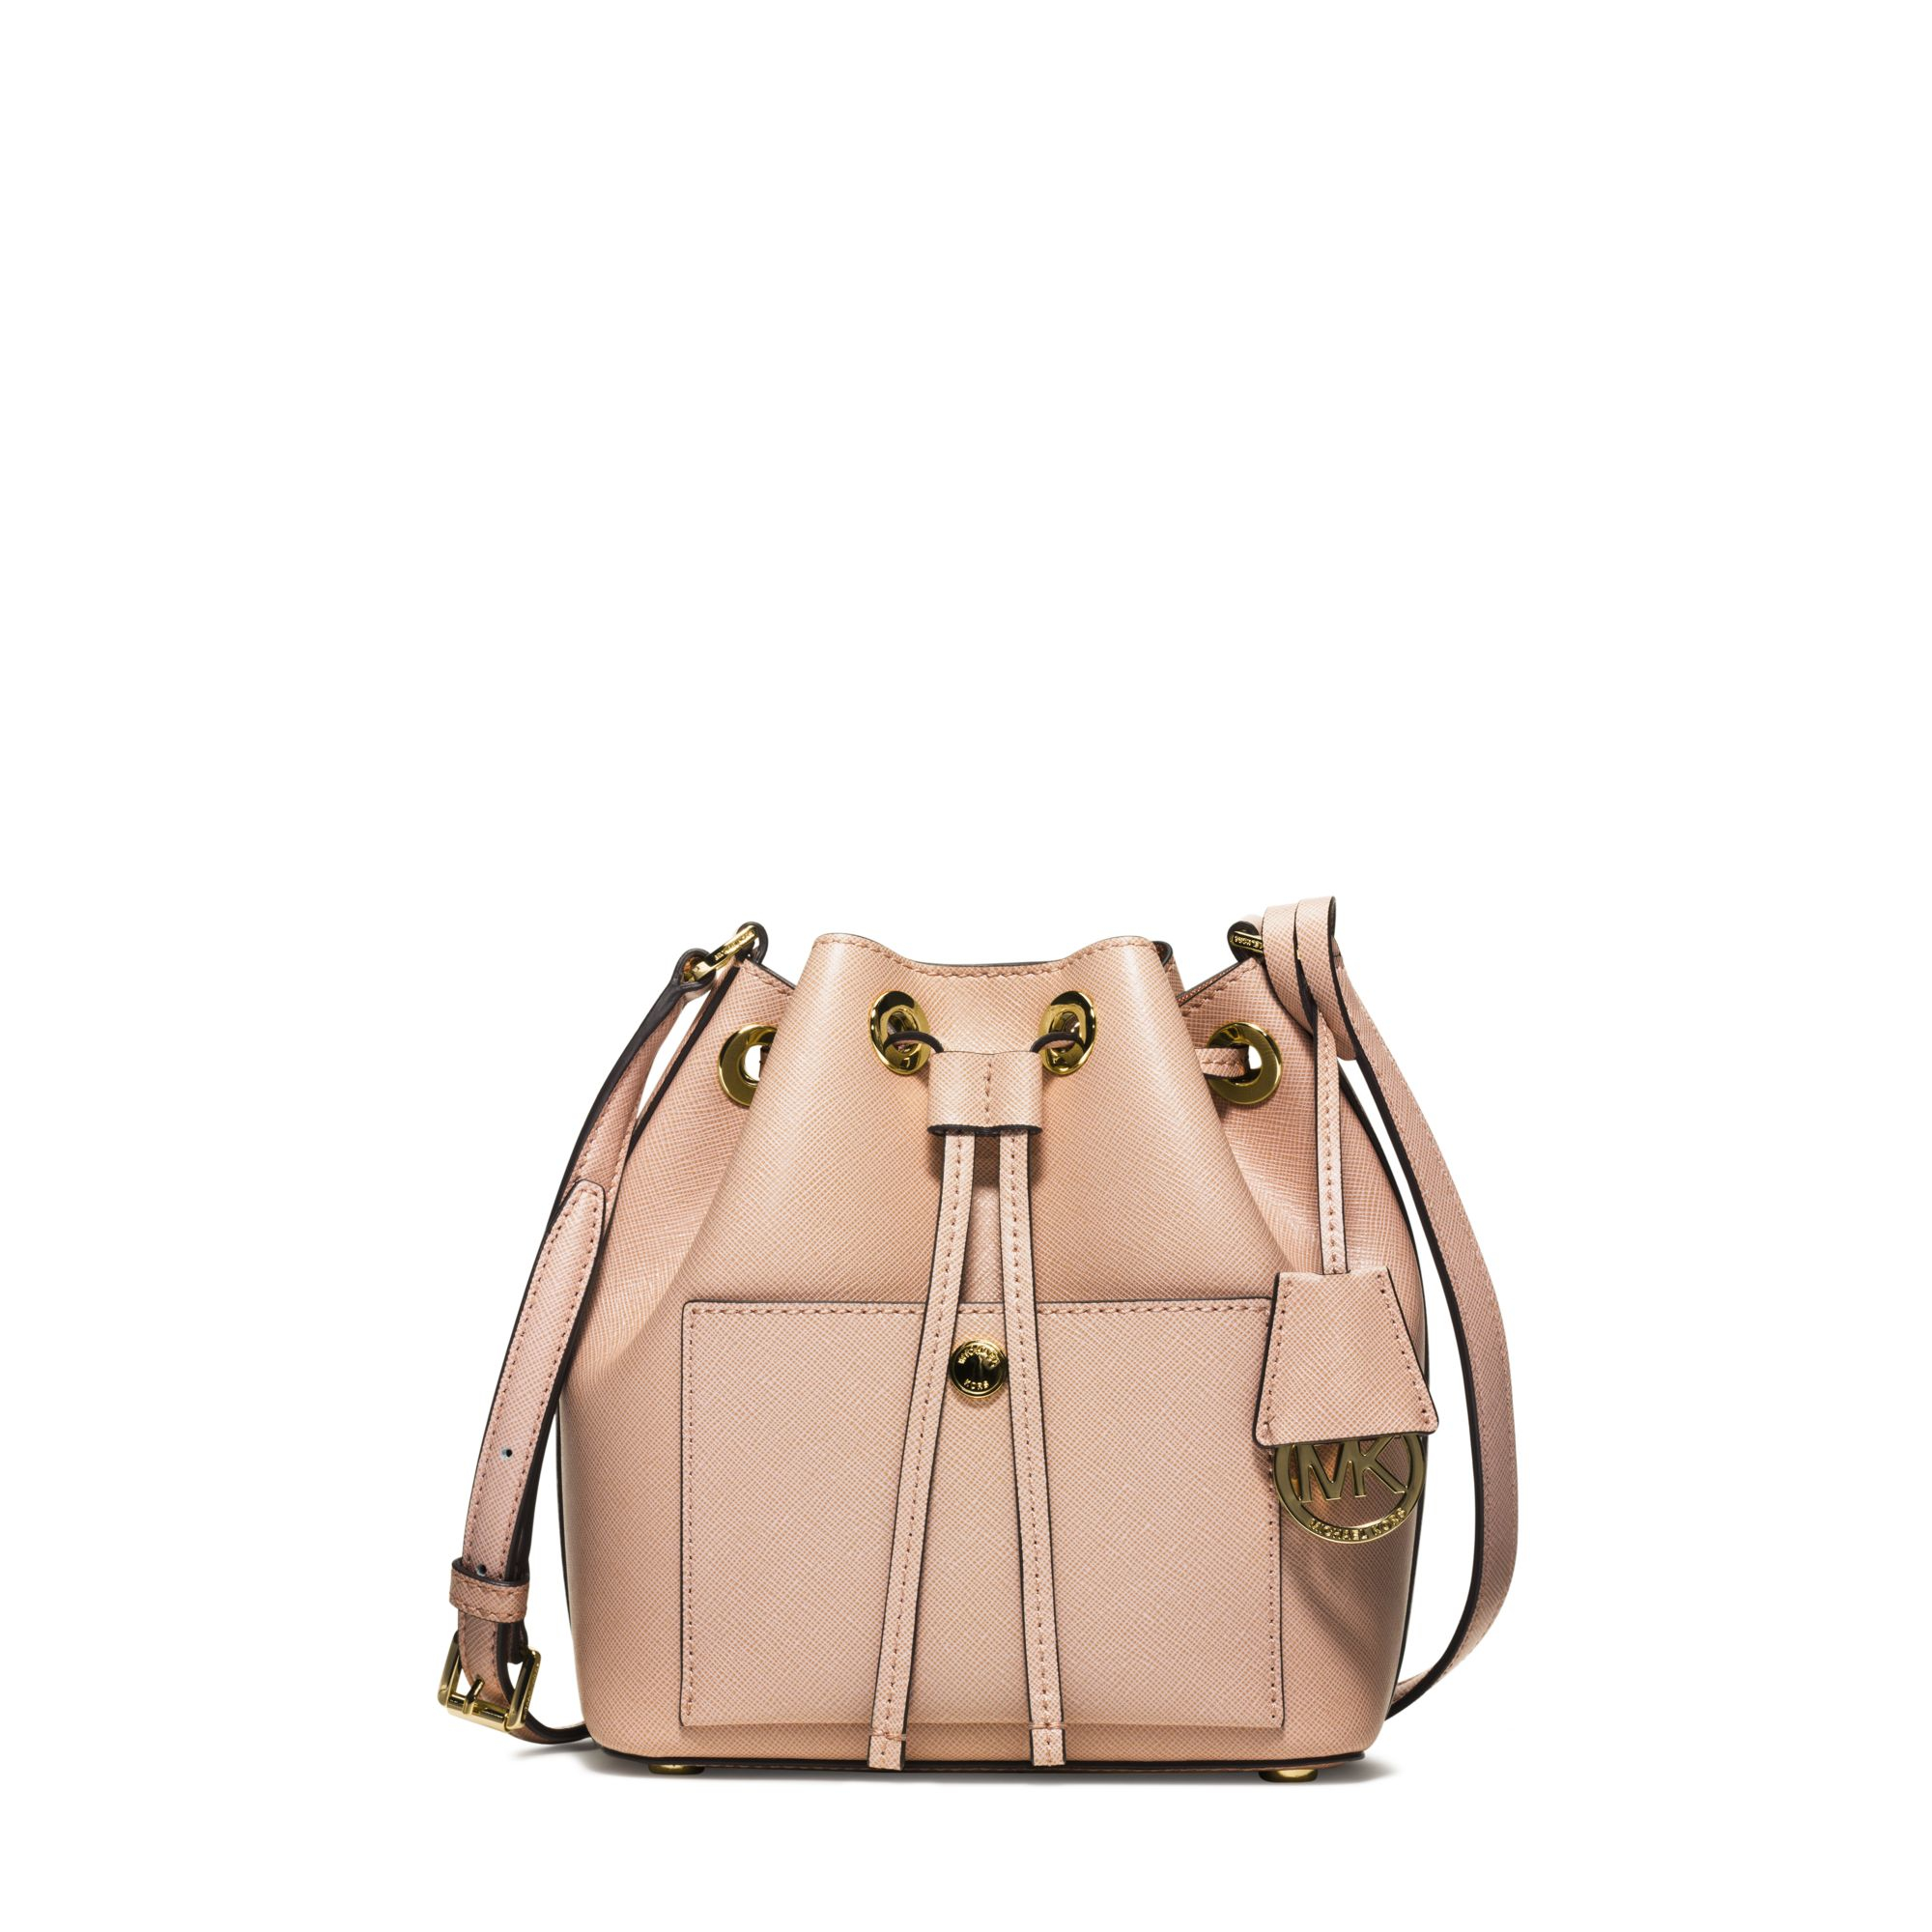 Michael Kors Greenwich Small Saffiano Leather Bucket Bag In Pink